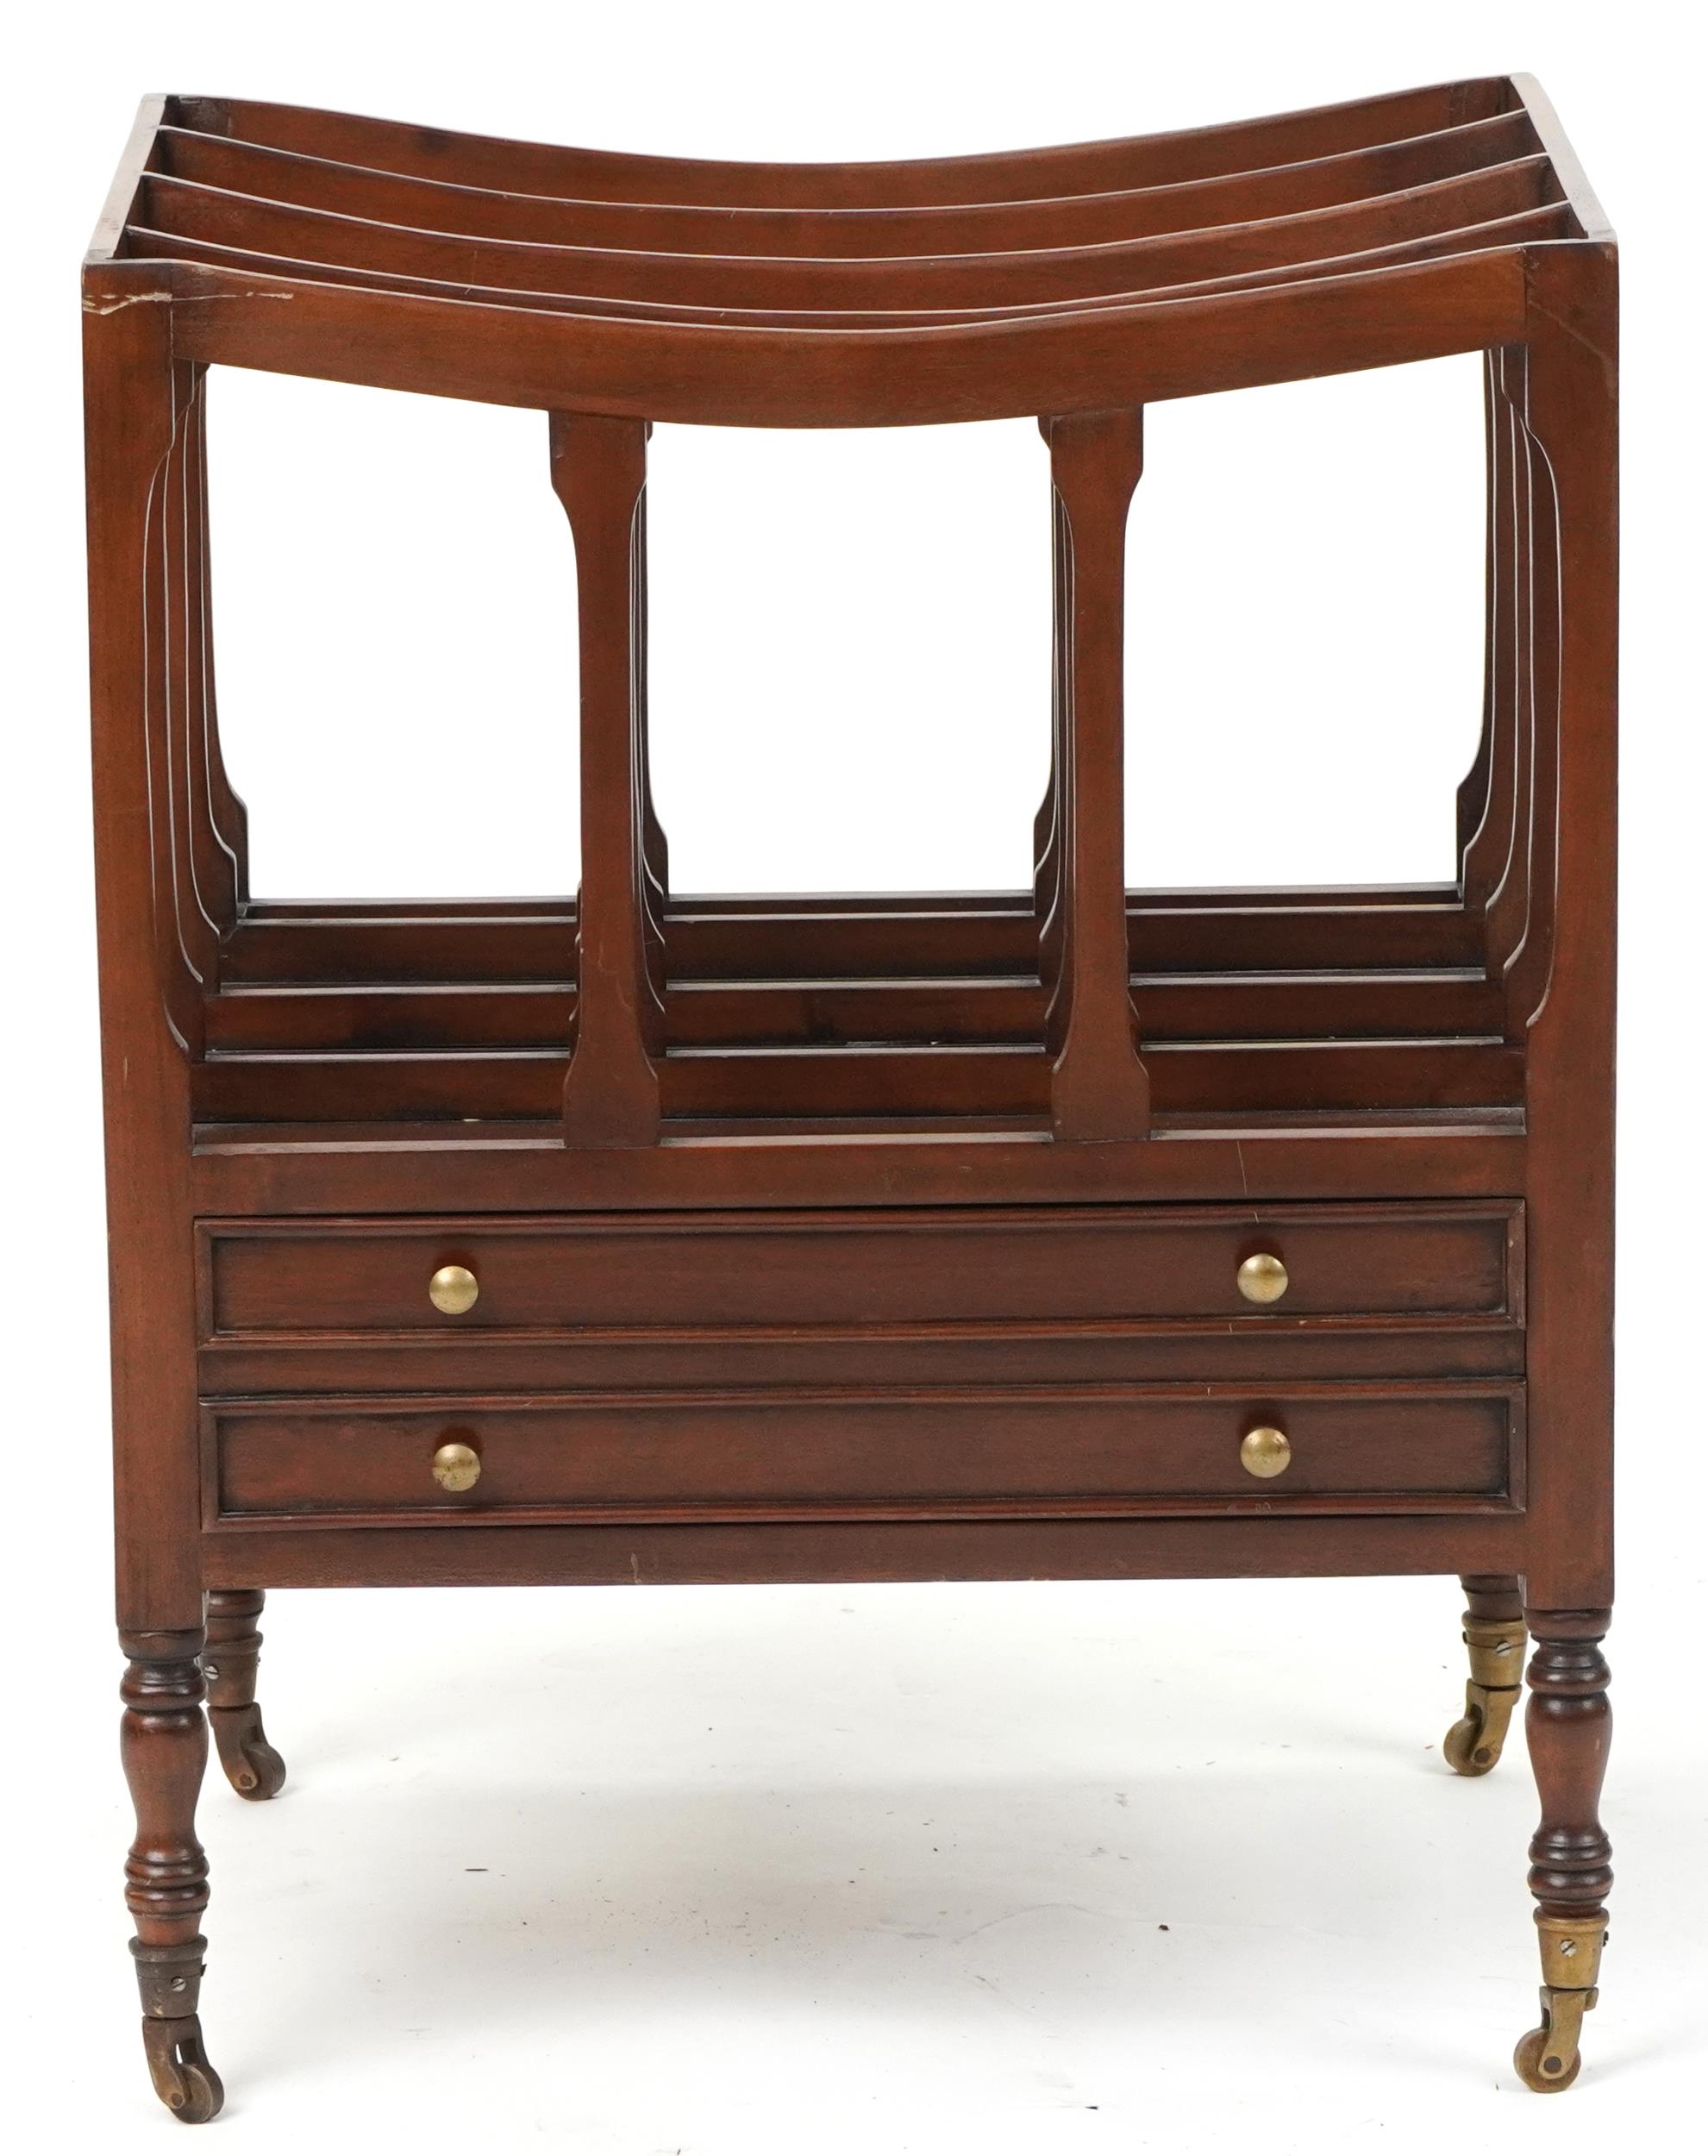 George III style mahogany Canterbury with base drawer on turned legs with brass casters, 59cm H x - Image 2 of 4